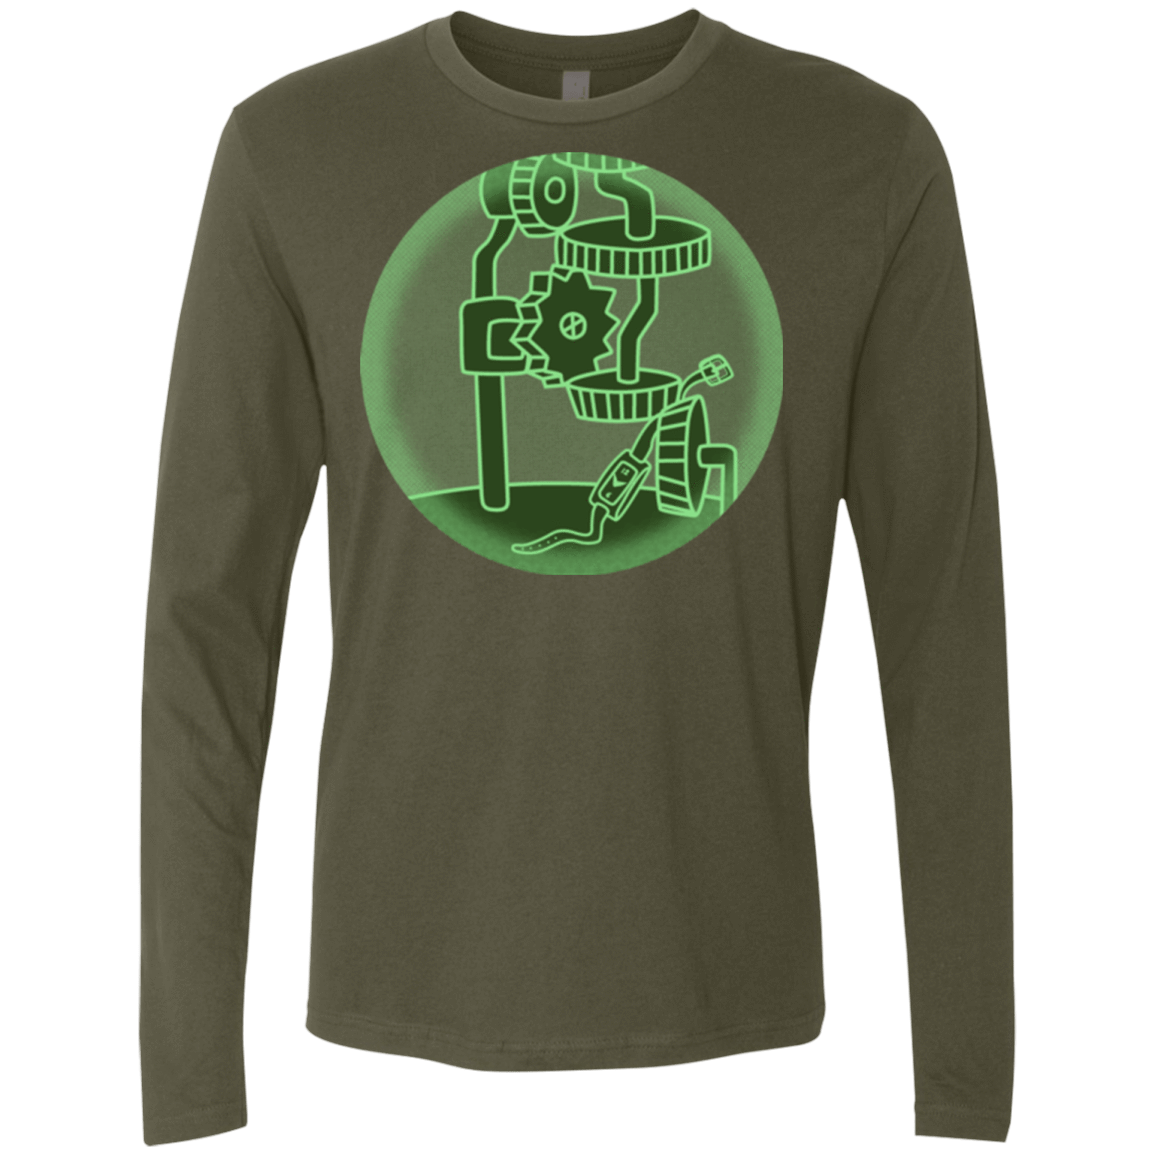 T-Shirts Military Green / Small Inside The Thief Men's Premium Long Sleeve